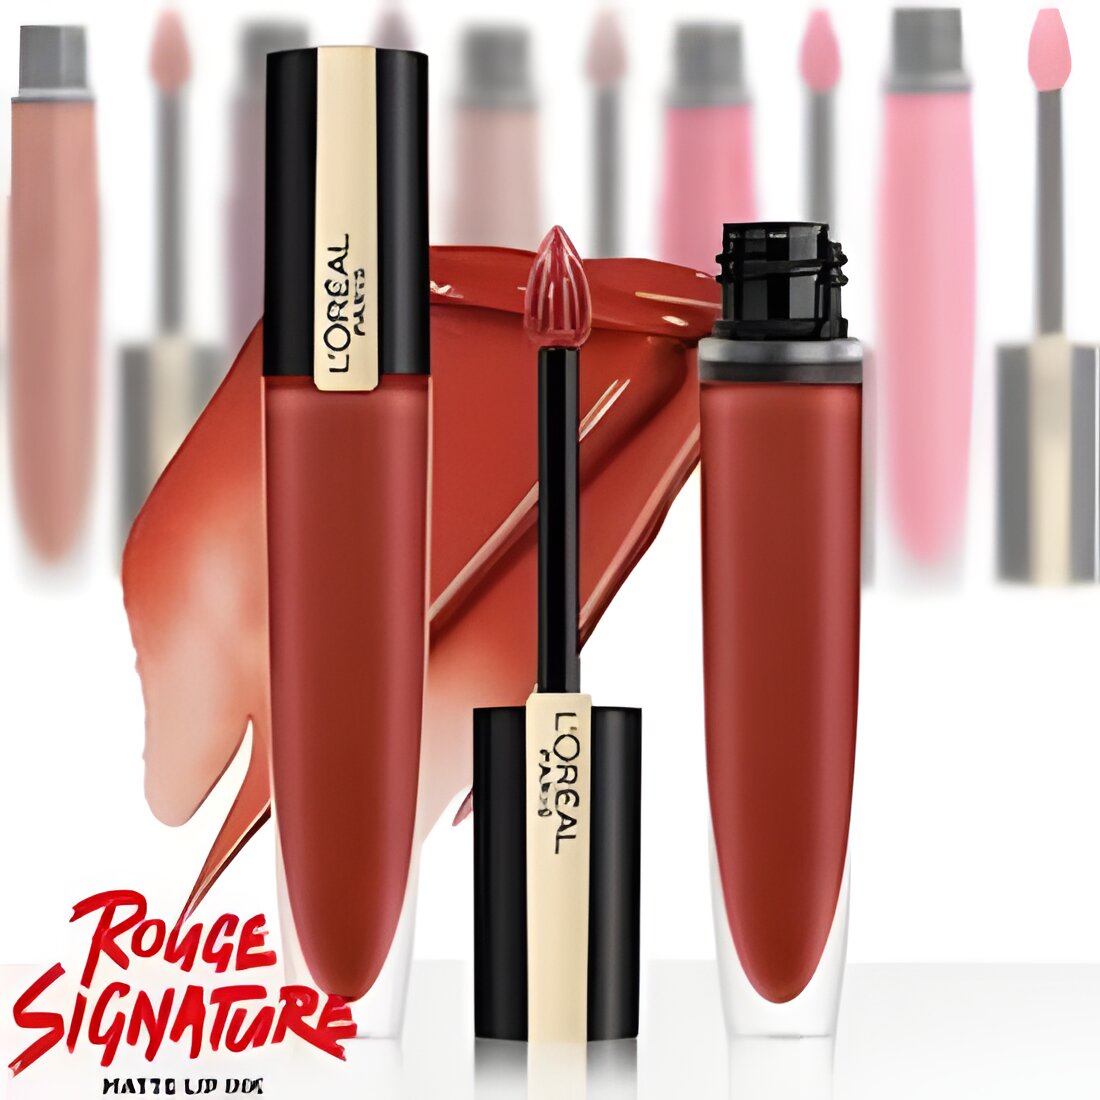 Free L'Oreal Rouge Signature Matte Lip Stain Sample